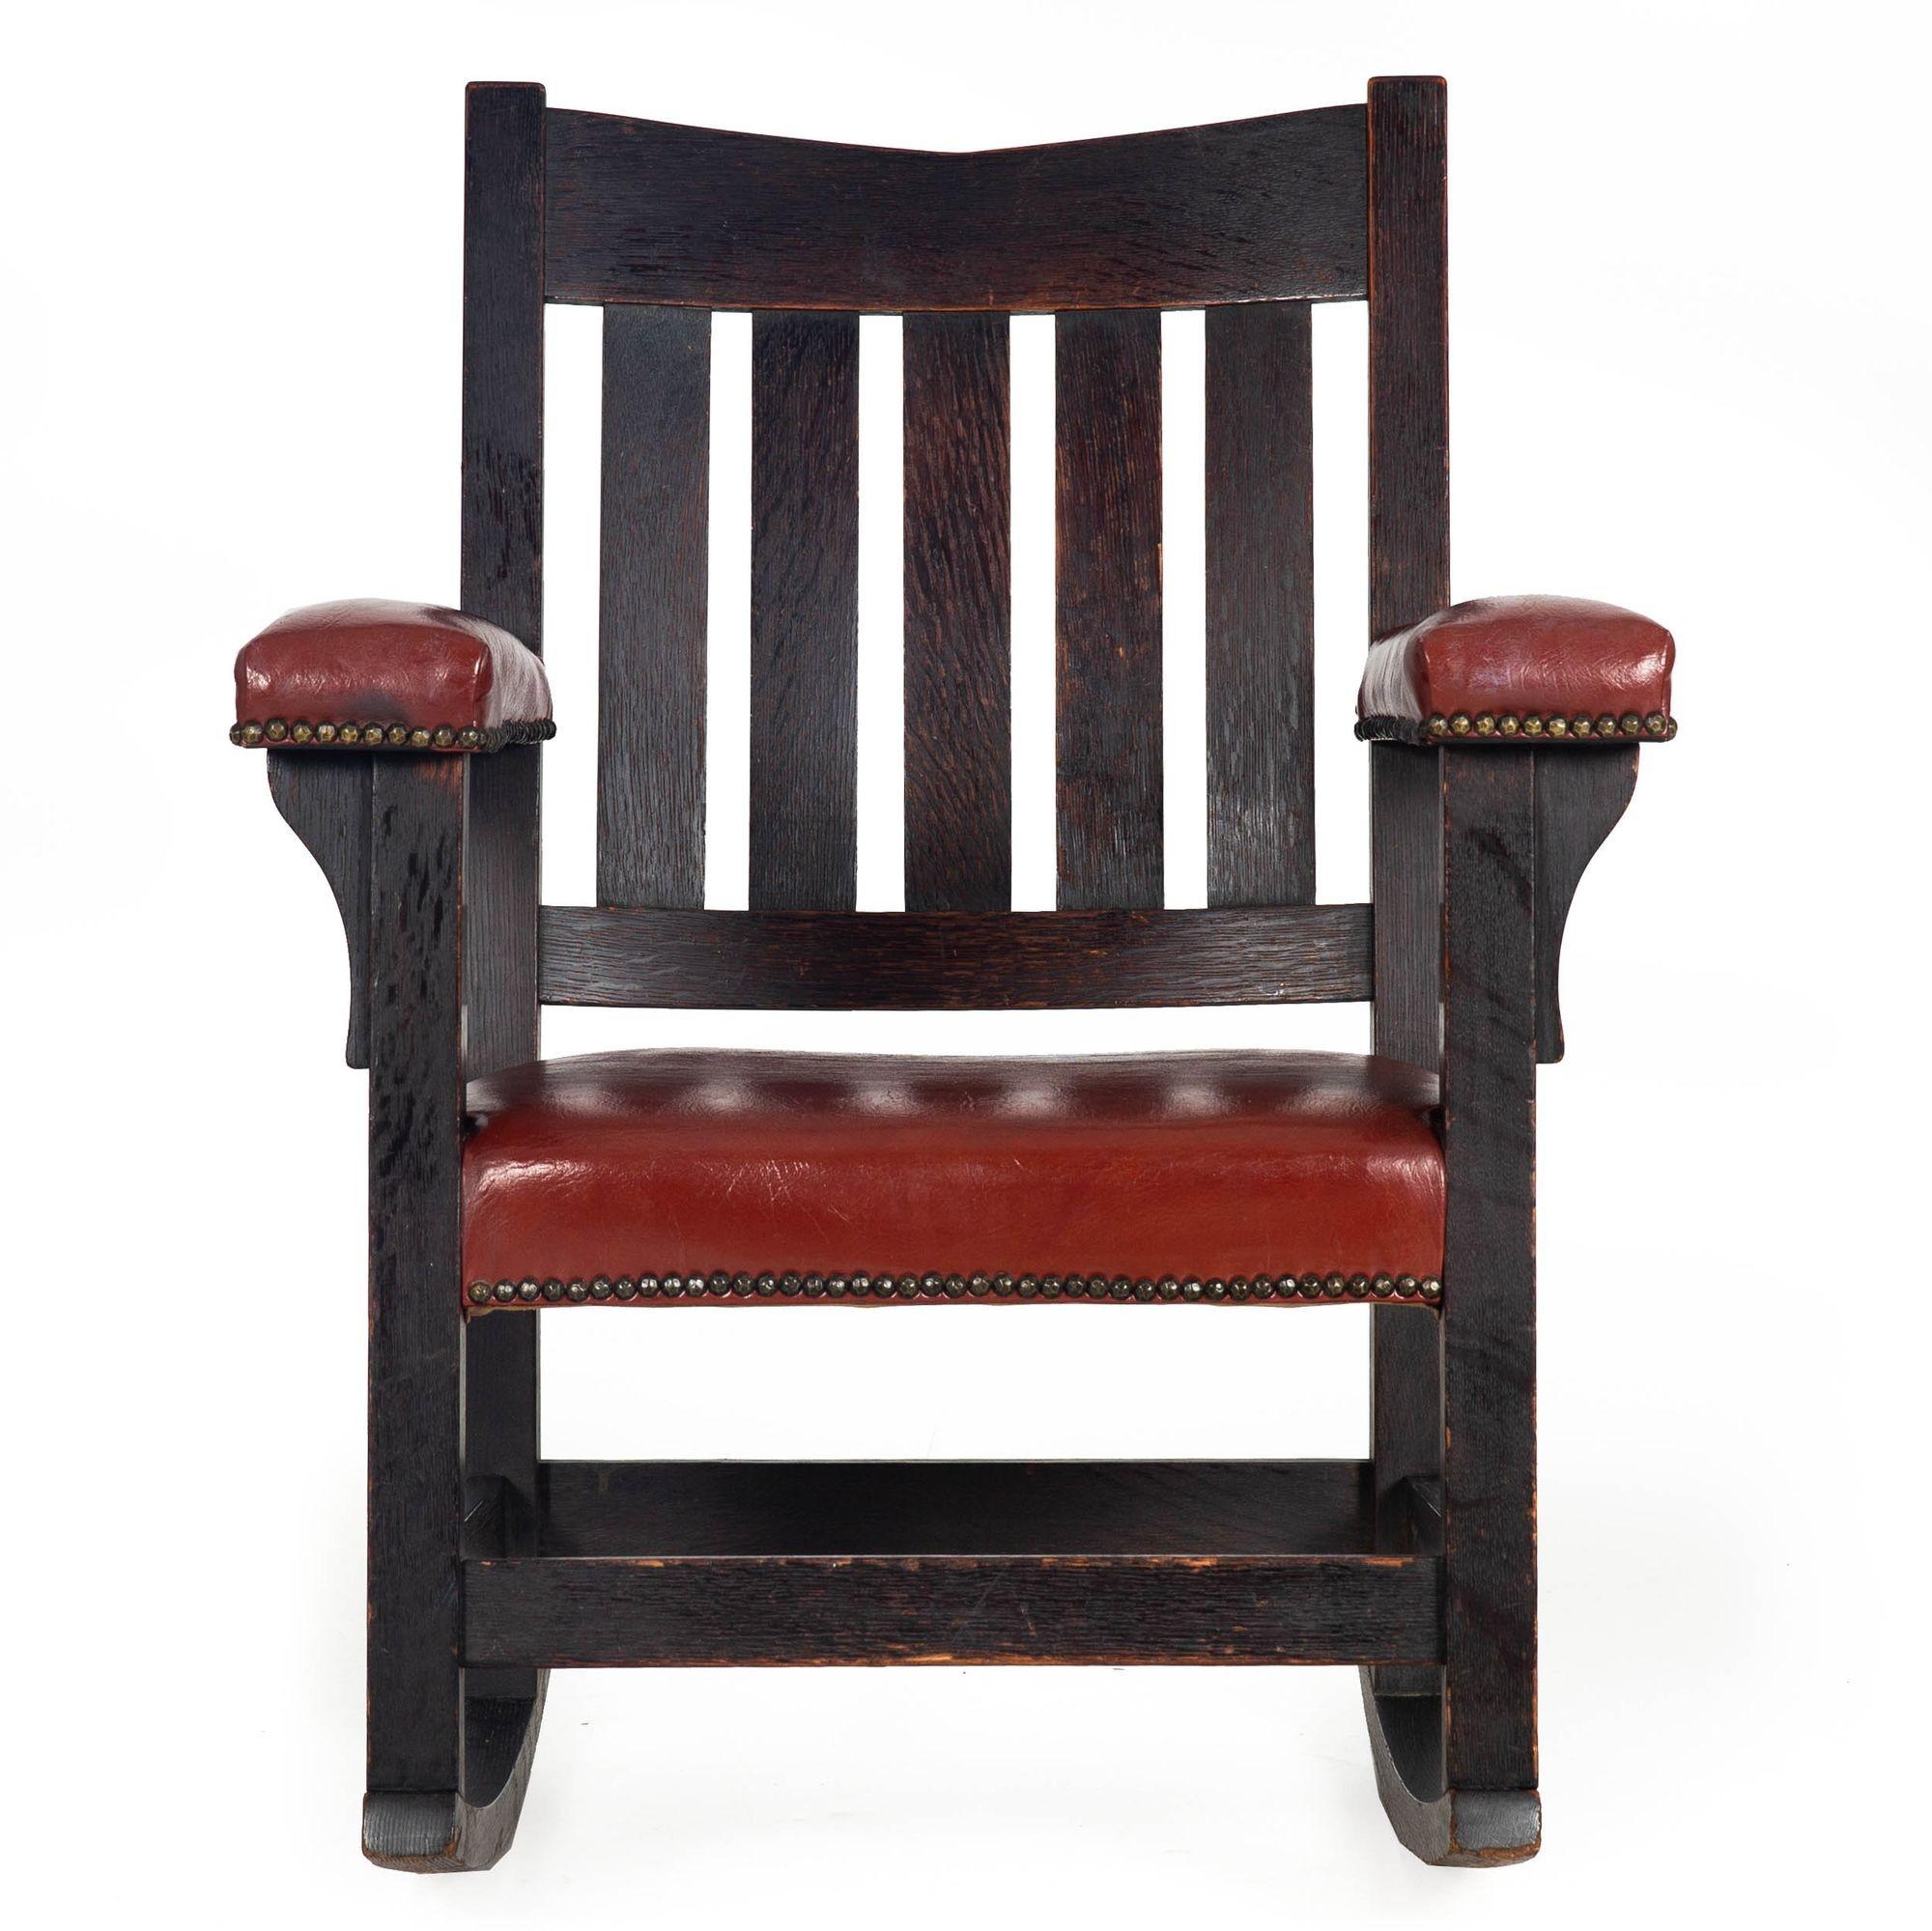 MISSION EBONIZED OAK ROCKING CHAIR NO. 311 1/2
Gustave Stickley ca. 1904-7, red ink maker's mark to the reverse
Item # 309VAX24P
Described in their 1904 catalogue as being 